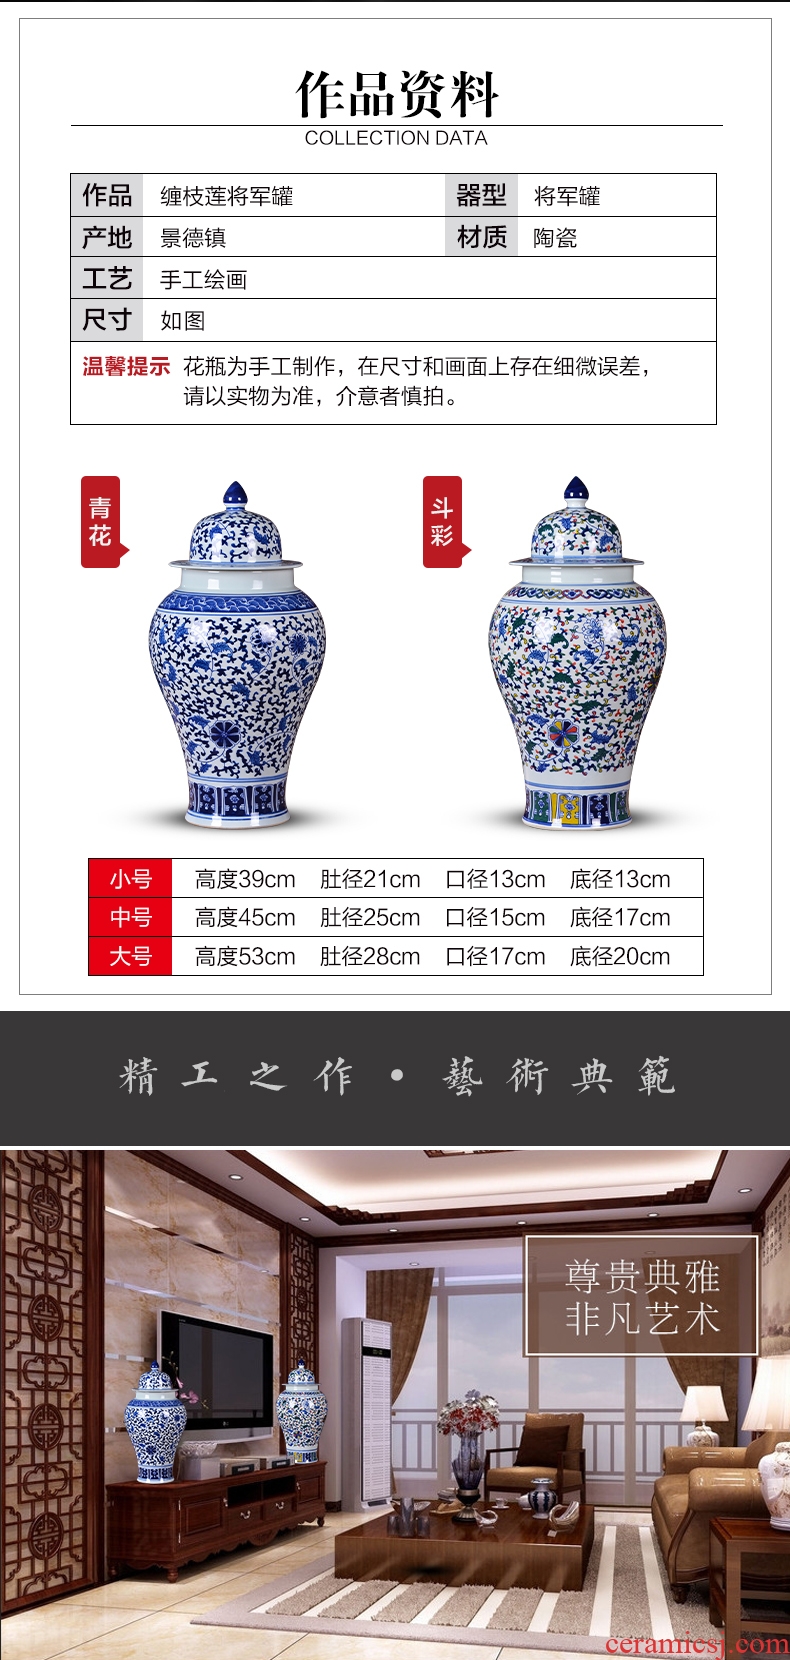 Better sealed up with archaize carmine pastel large vases, home furnishing articles ceramic home sitting room adornment mei bottle by hand - 569203857099